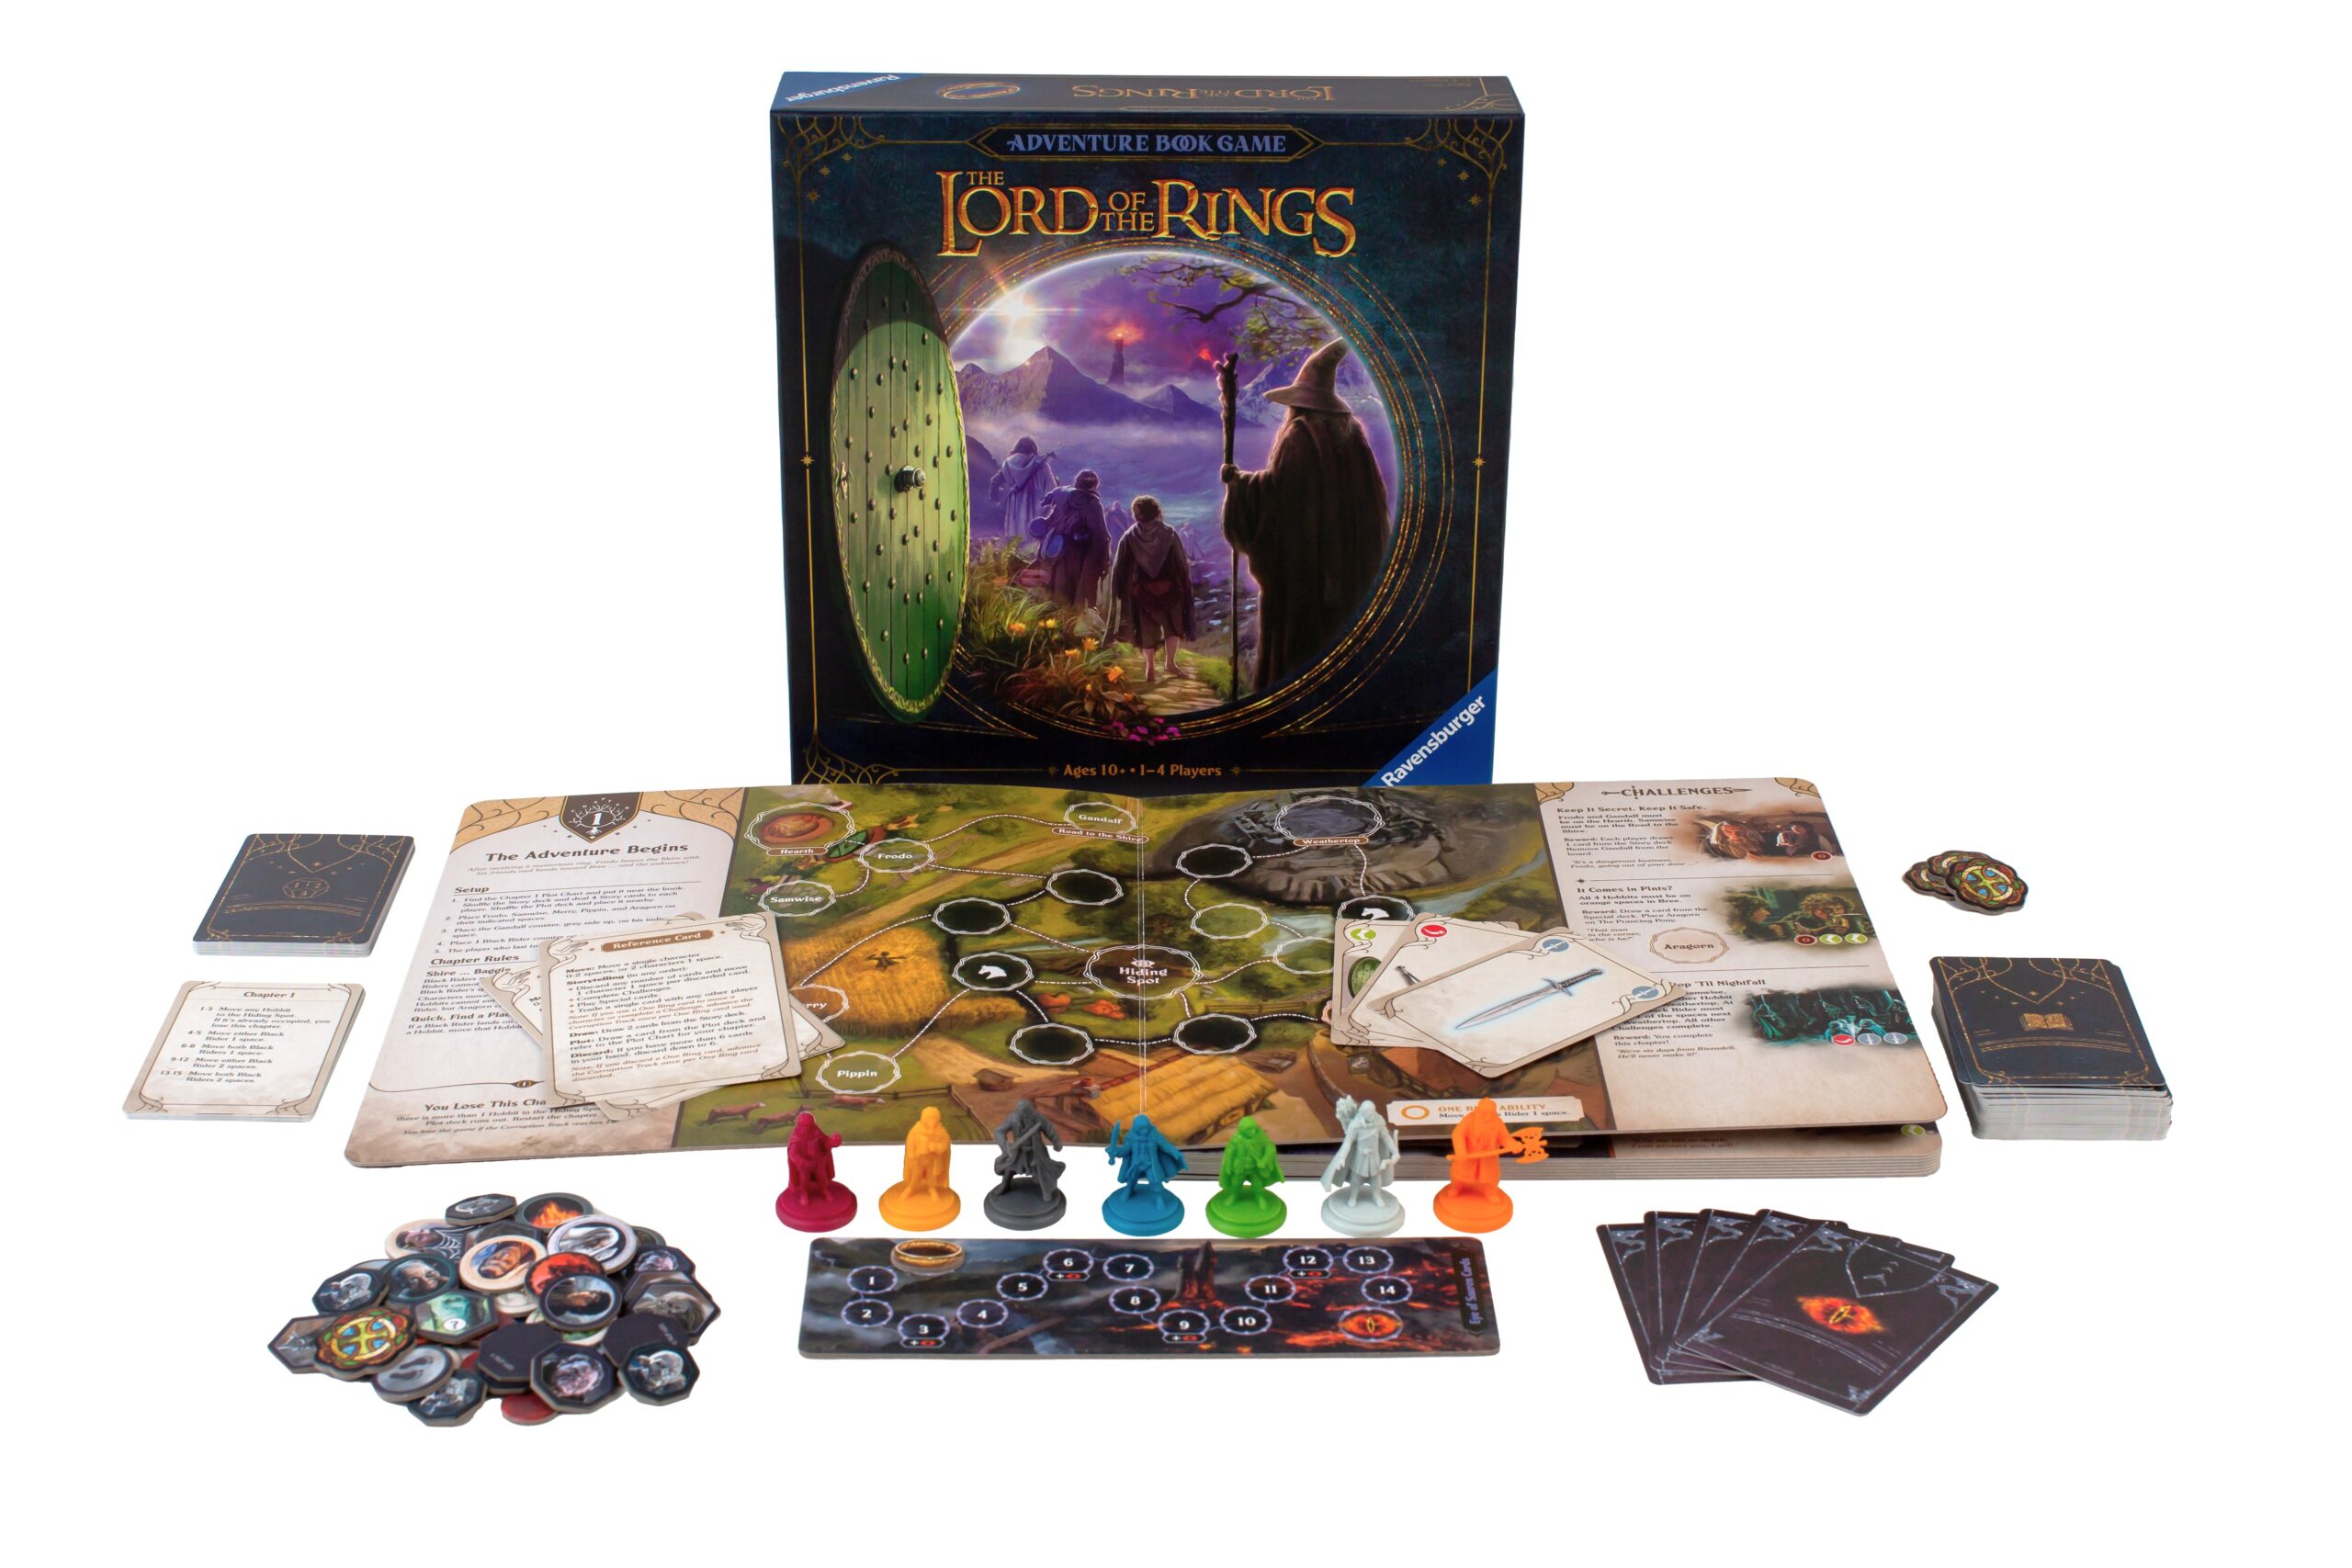 The Lord of the Rings Adventure Book Game contents